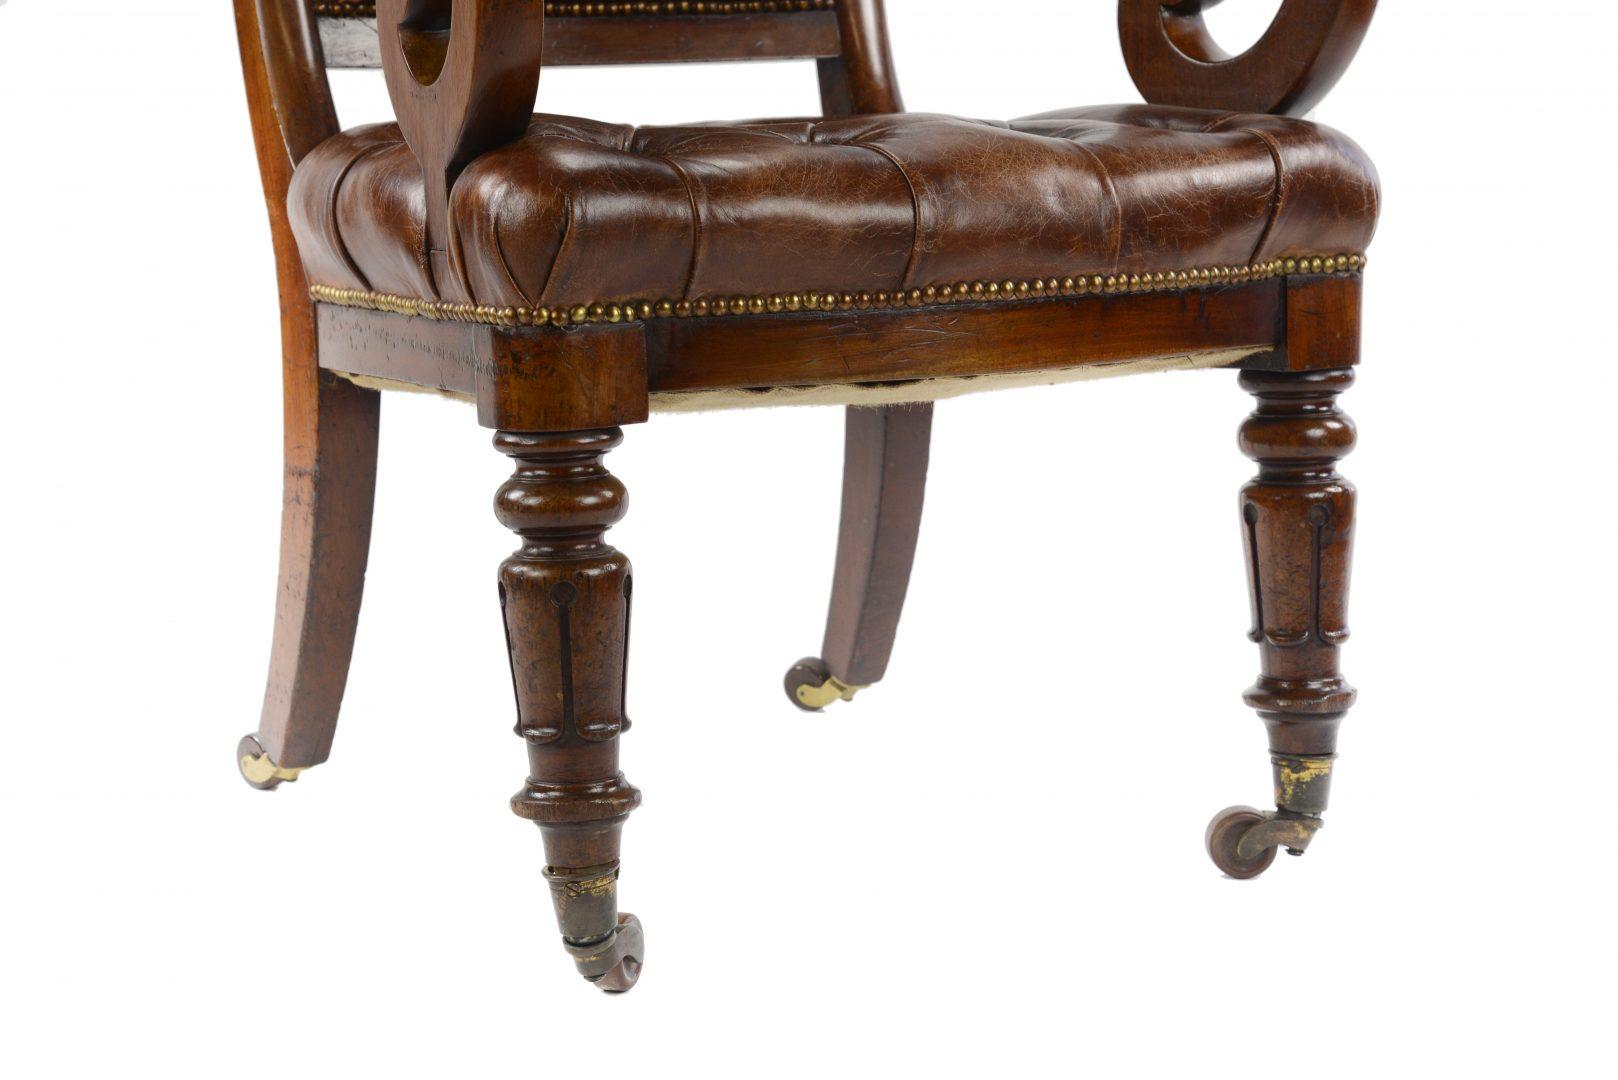 William IV William iv Mahogany Desk or Library Chair attributed to Gillows 